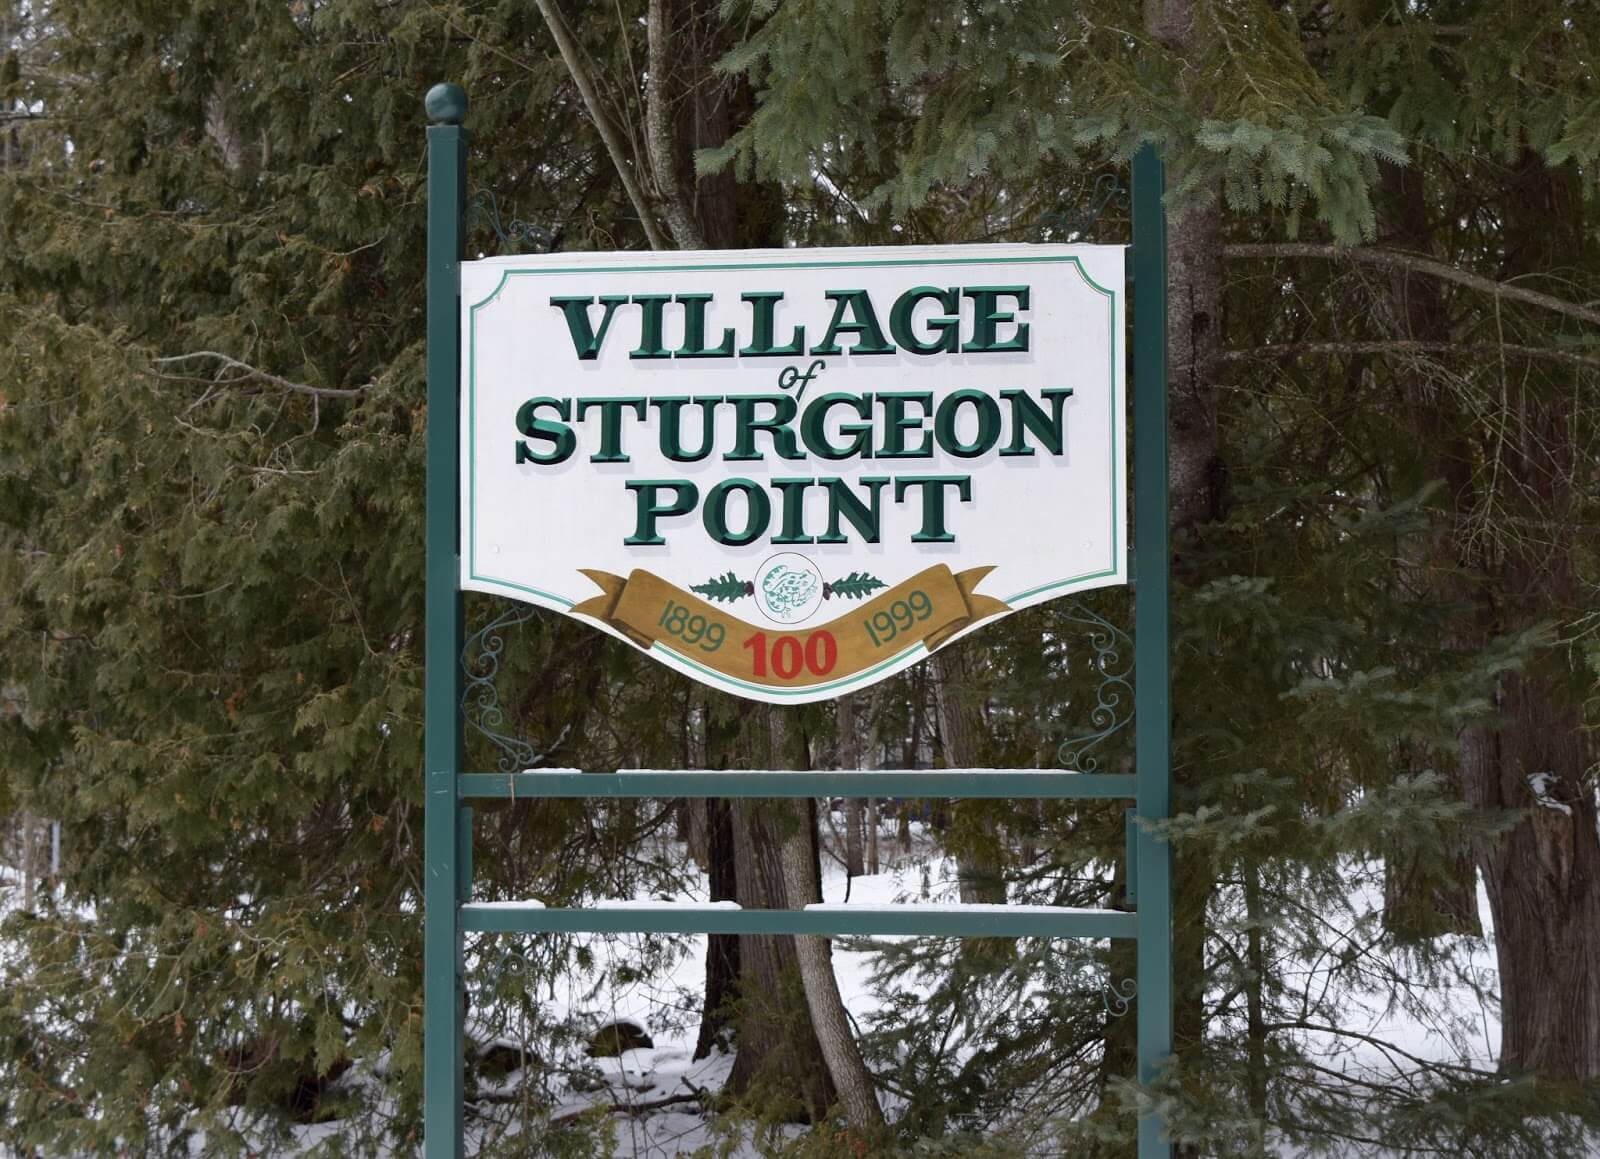 A wooden sign outside in the winter reading "Village of Sturgeon Point"